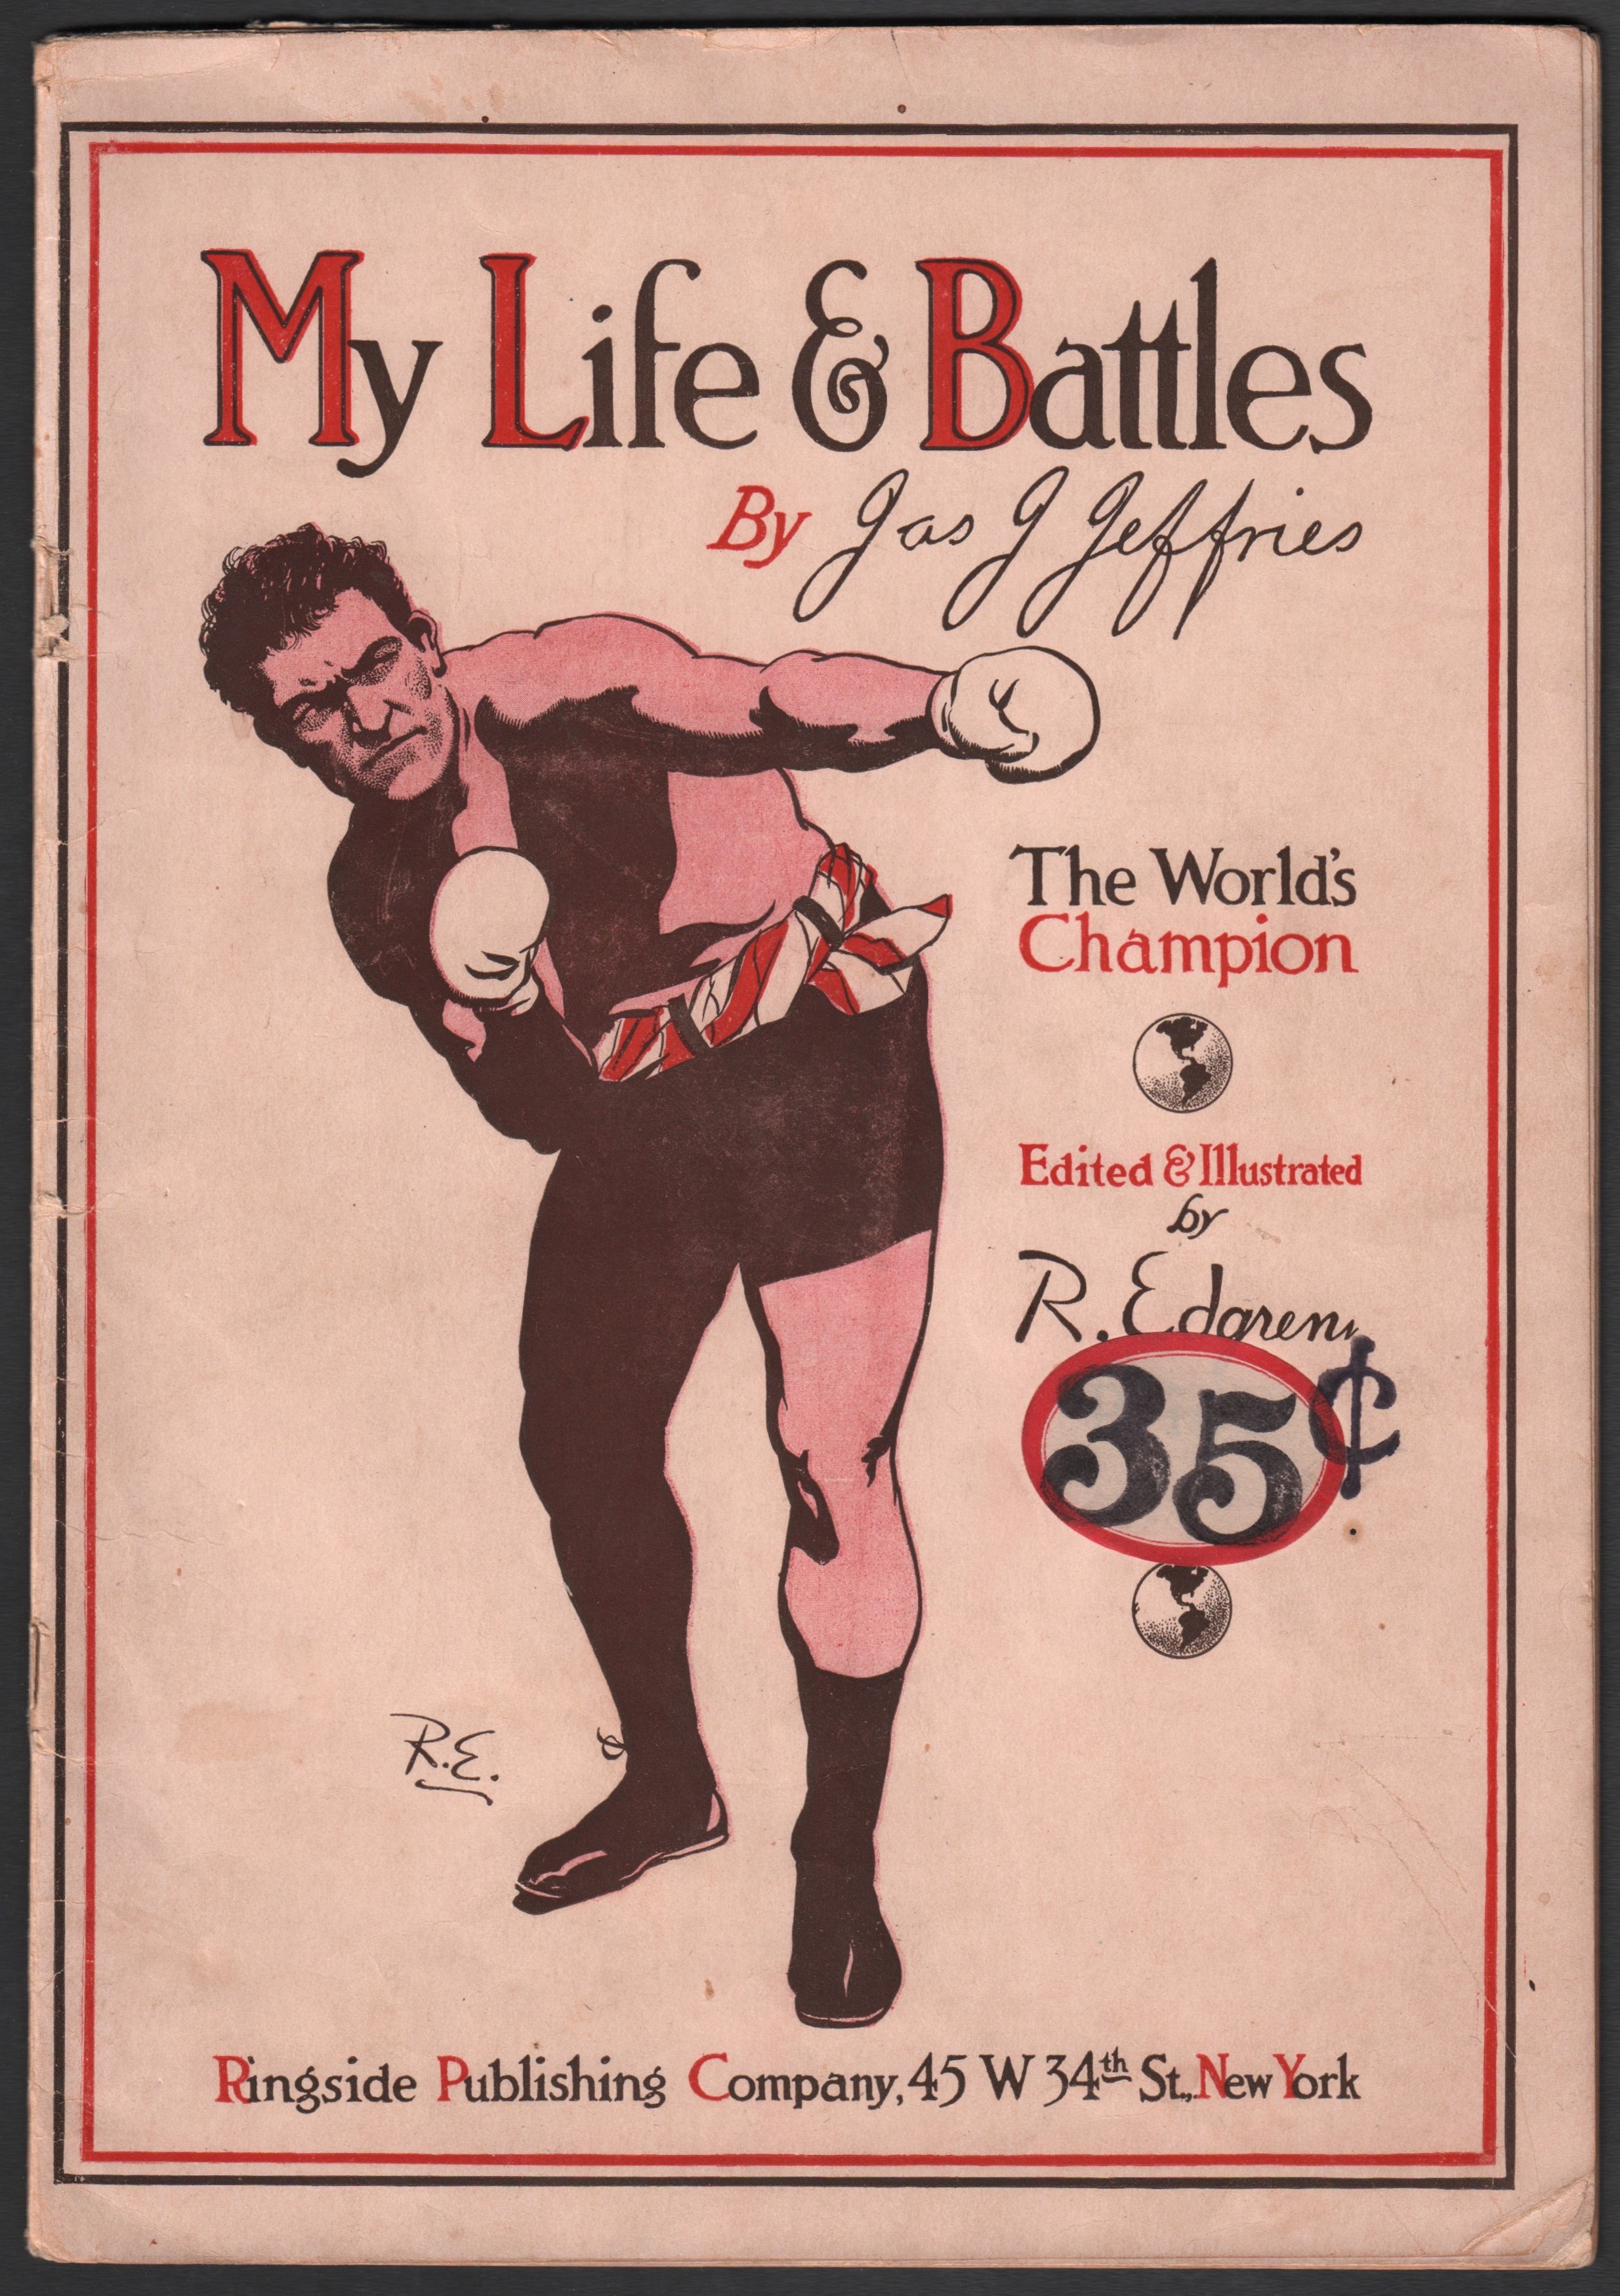 - My Life & Battles By James J Jeffries Signed by Edgren and Dated July 4, 1910